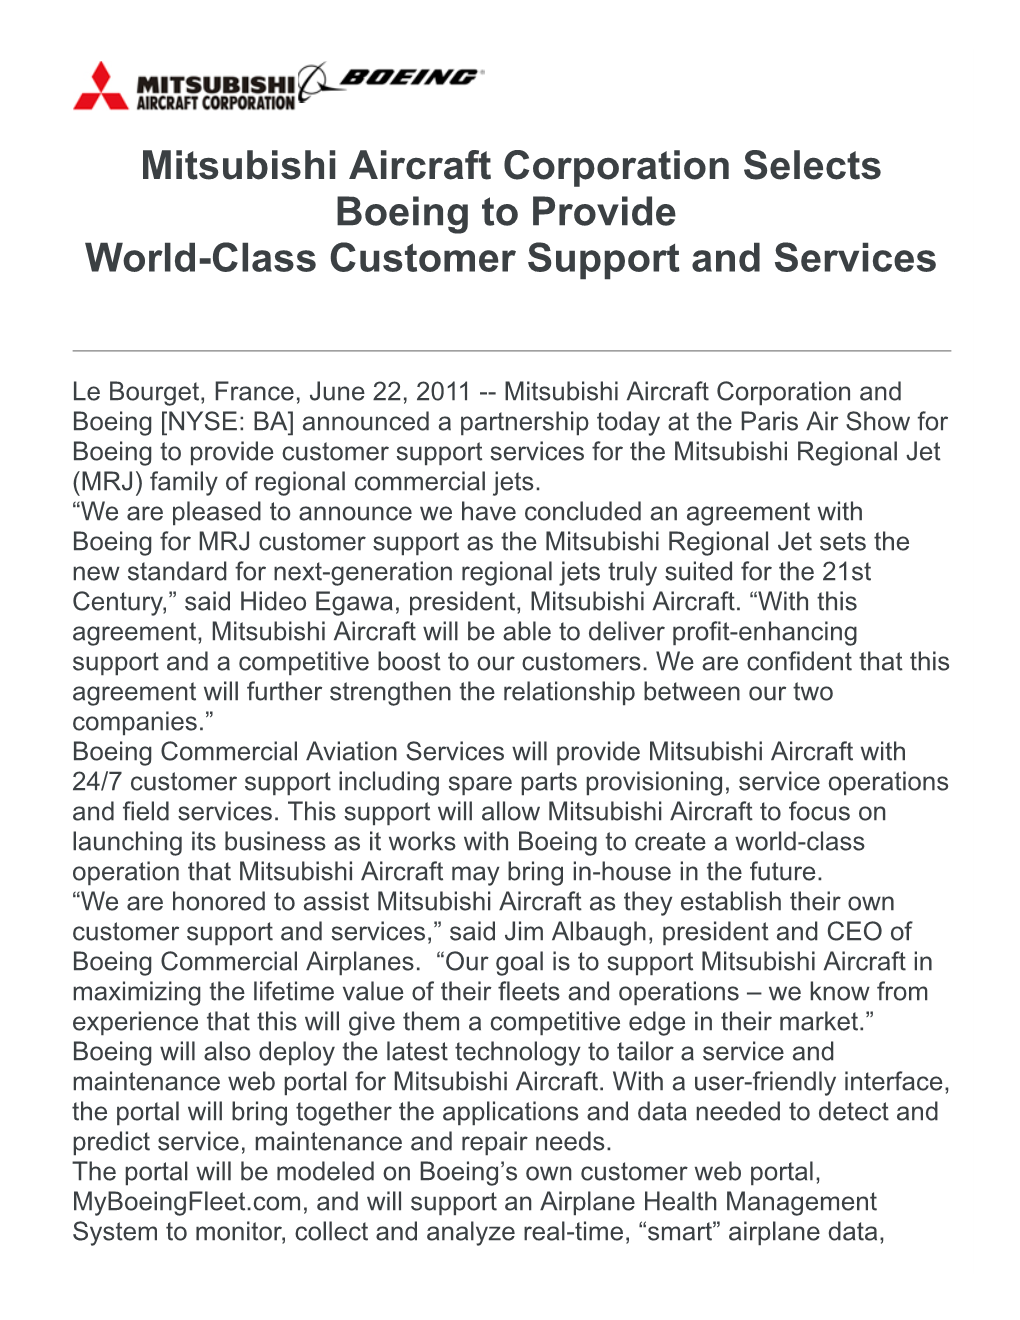 Mitsubishi Aircraft Corporation Selects Boeing to Provide World-Class Customer Support and Services